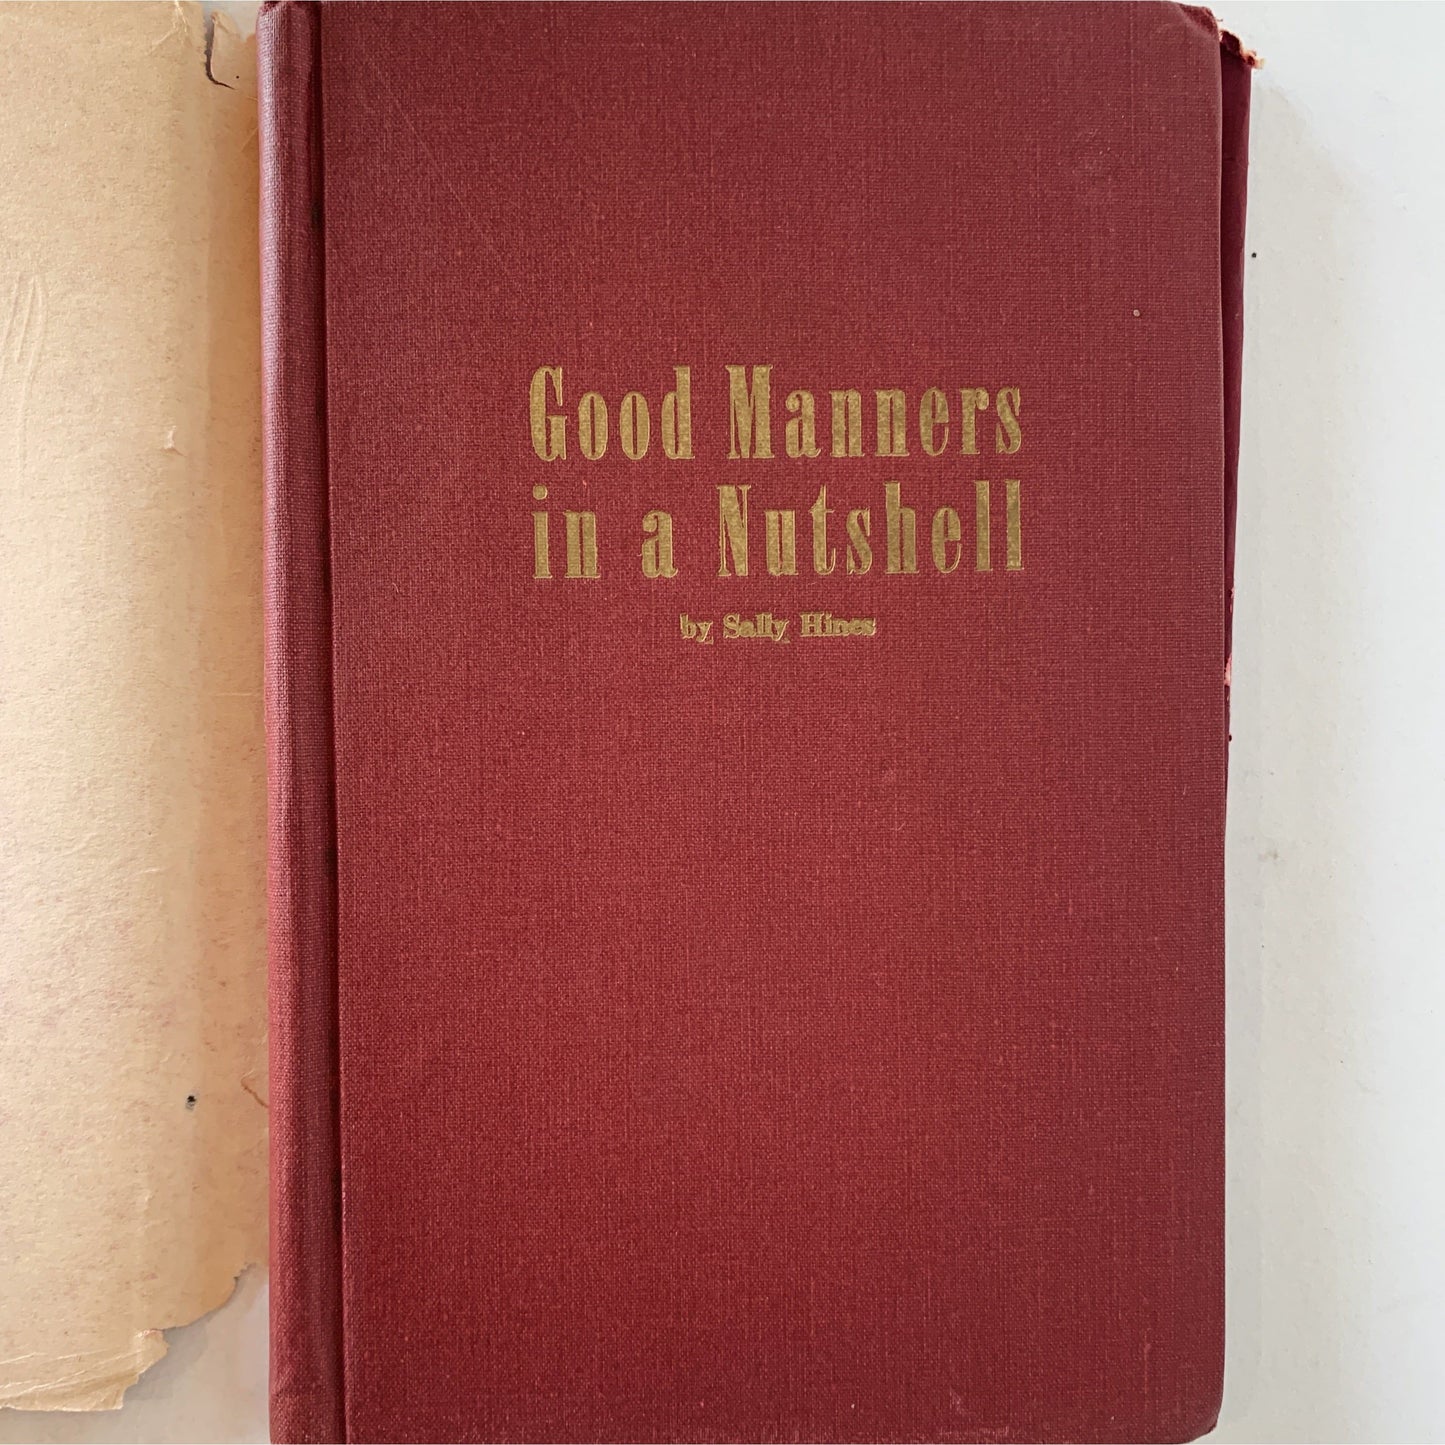 Good Manners in a Nutshell, Sally Hines, 1946 Hardcover Etiquette Book